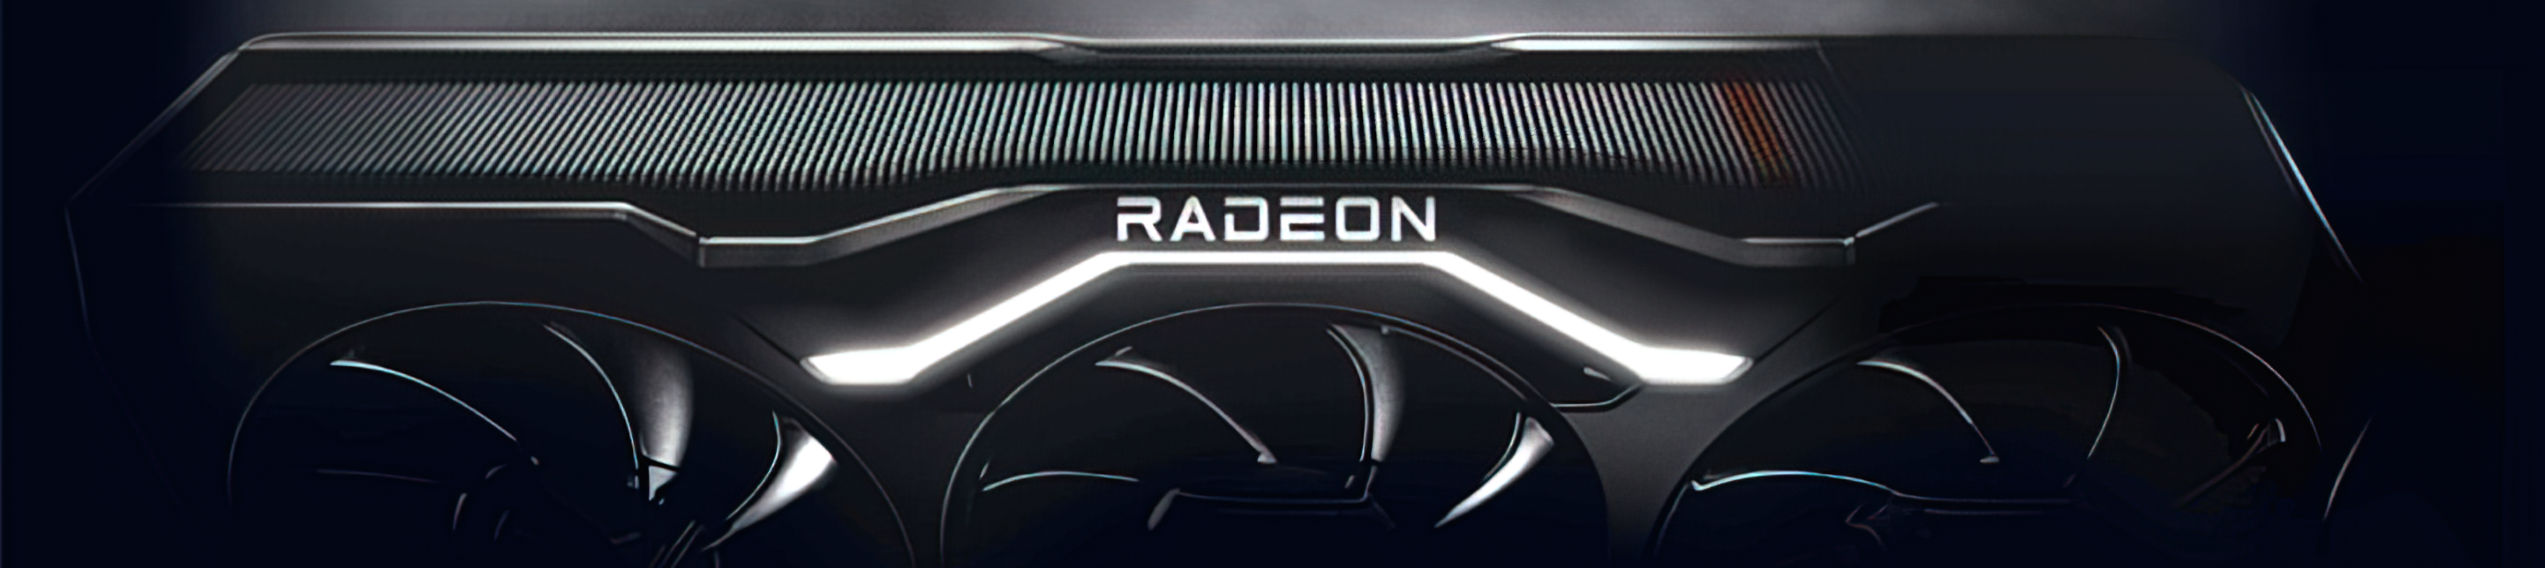 News - Hardware - AMD to launch Radeon RX 7000 series on November 3rd ...